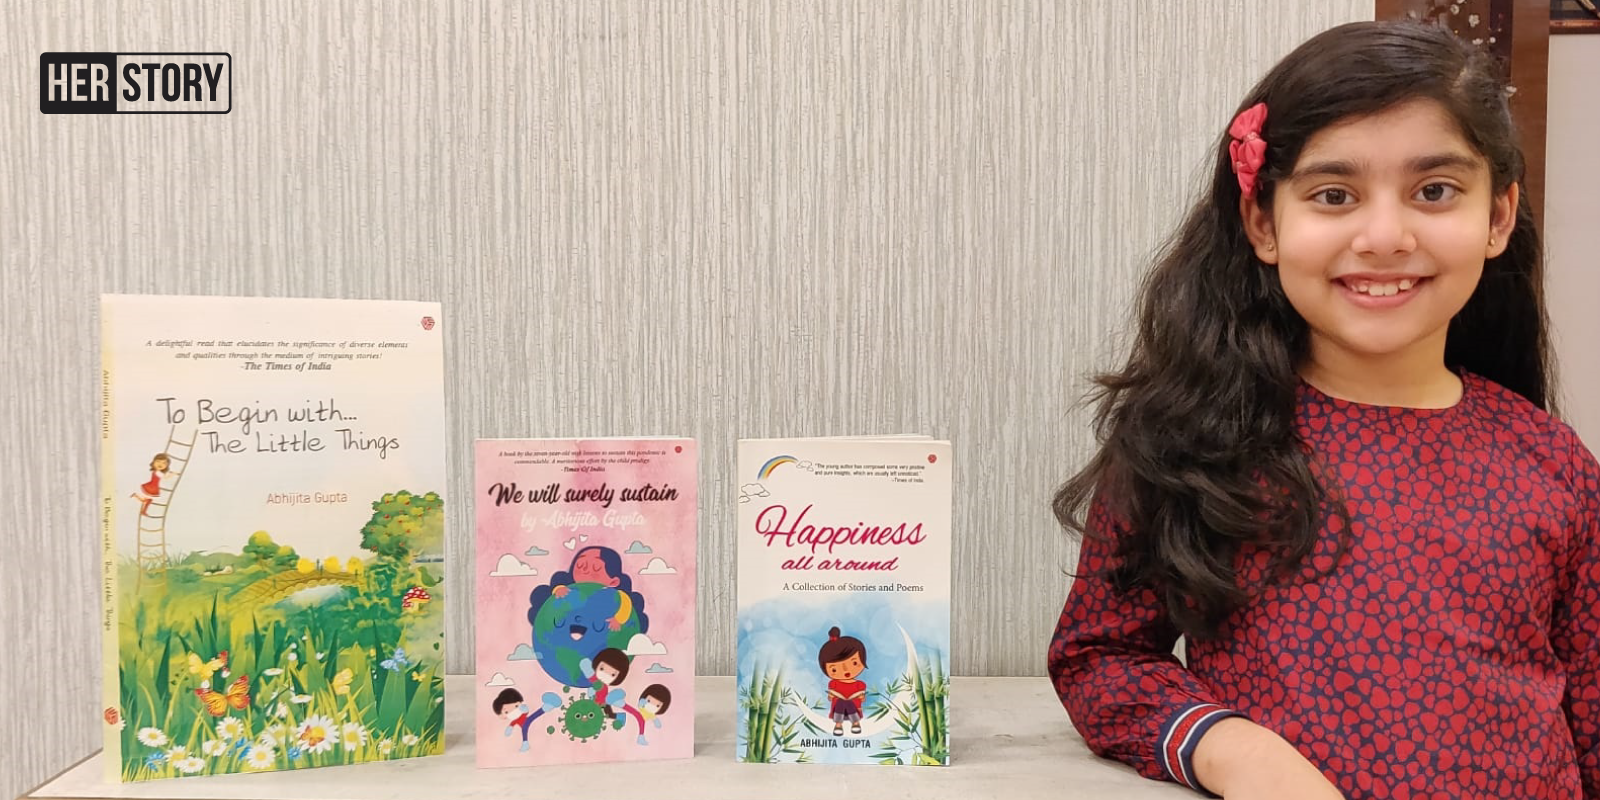 Author at 8: Abhijita Gupta received Rs 3 lakh royalty after her latest book release